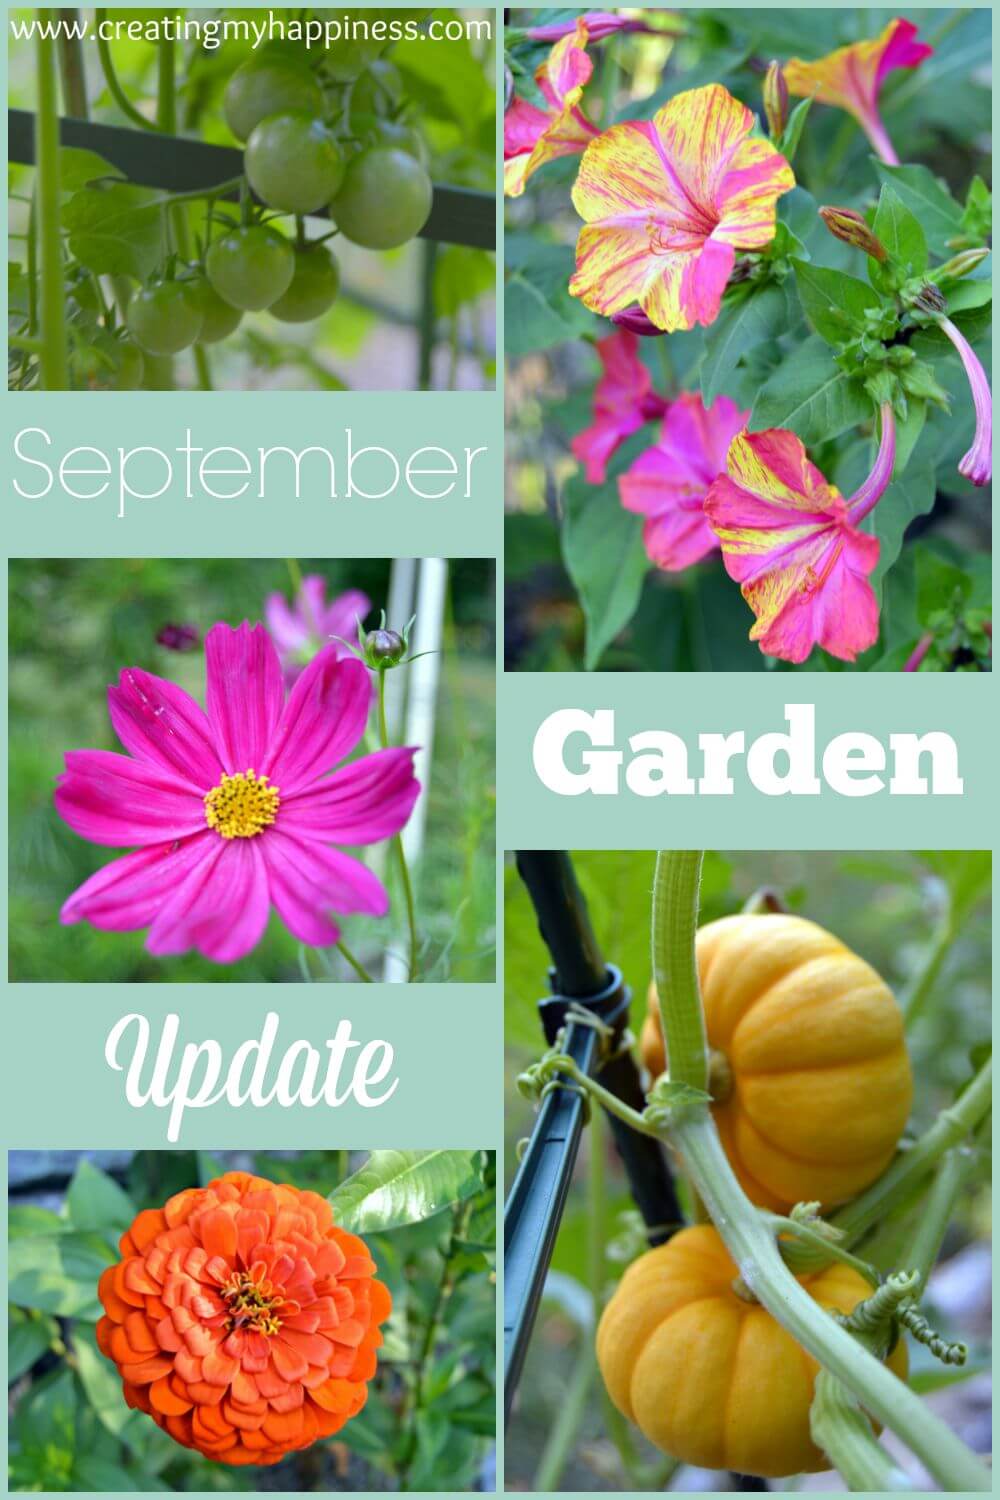 It seems that my first summer of gardening was a success! See how I went from a brown thumb to having a thriving garden.